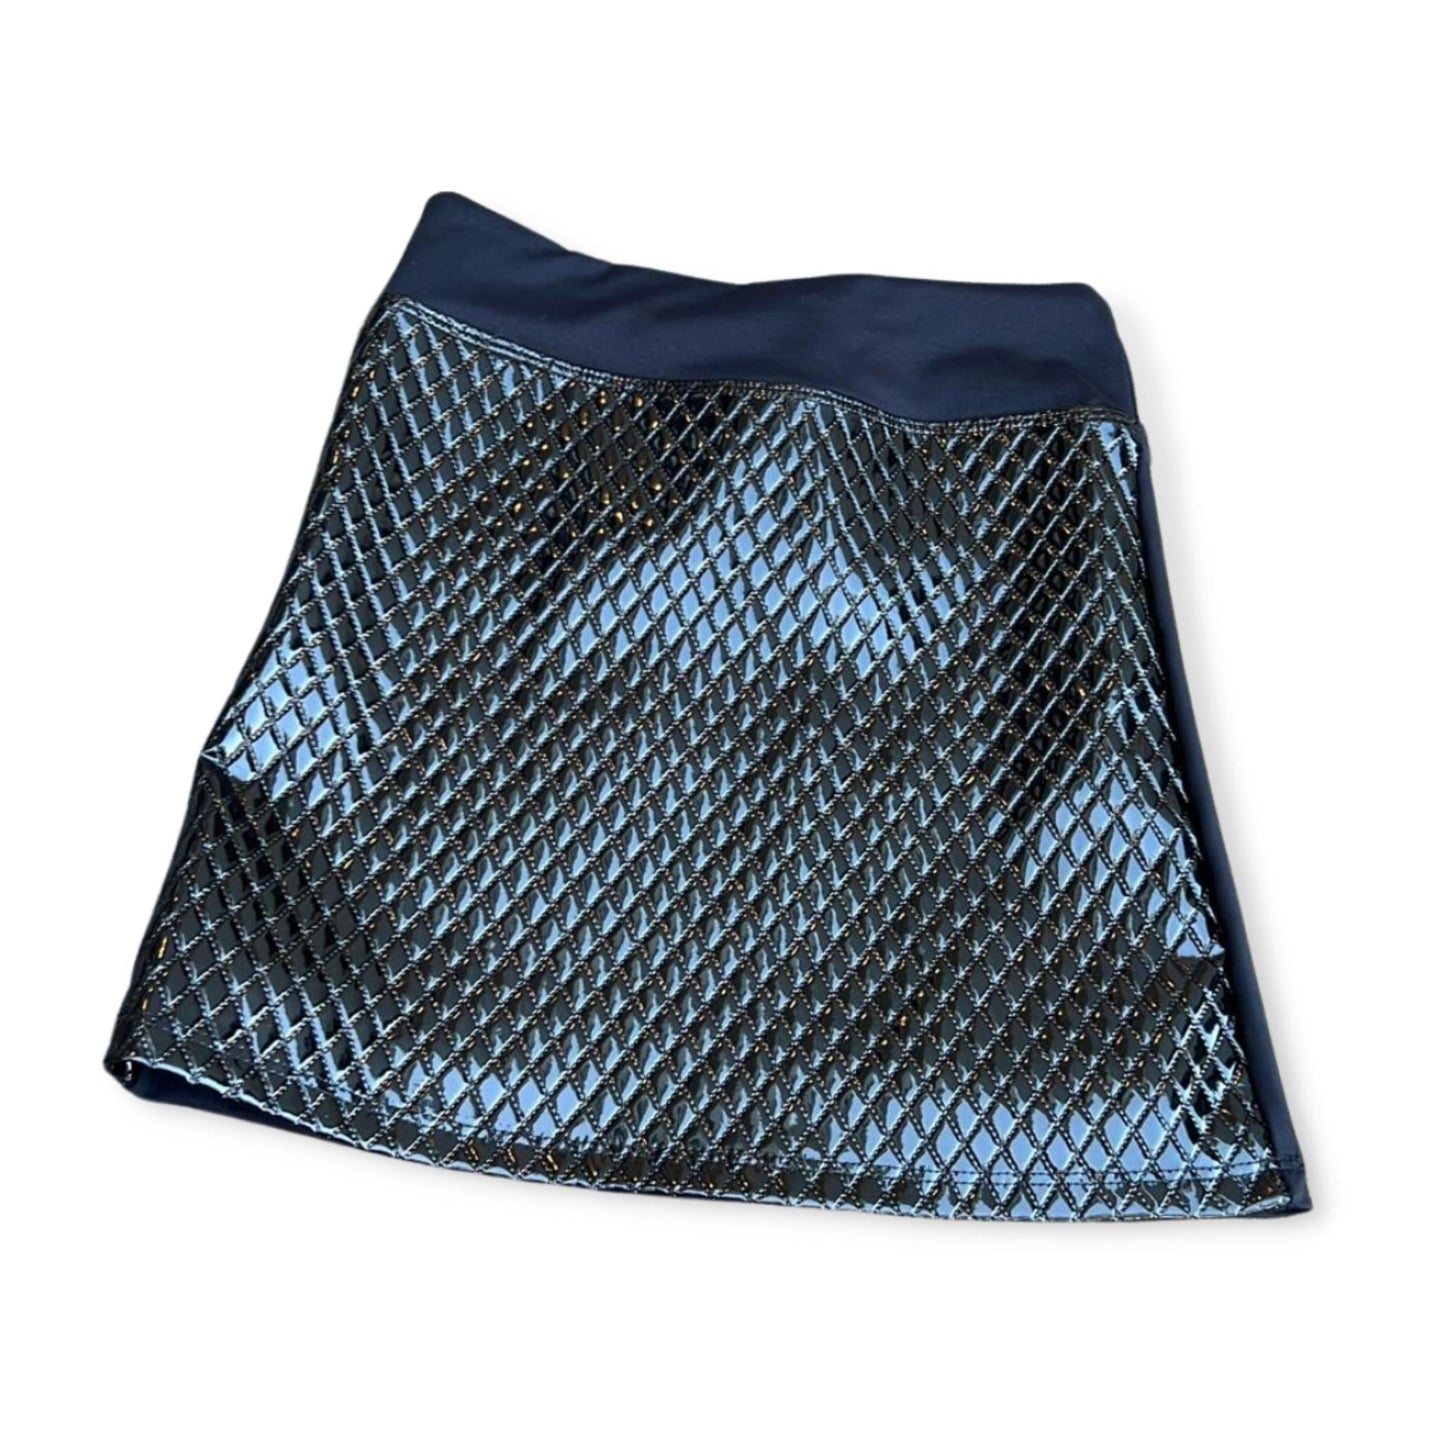 Les Tout Petits Black Quilted / Black Banded Skirt - a Spirit Animal - Skirt $60-$90 active Sep 2022 black